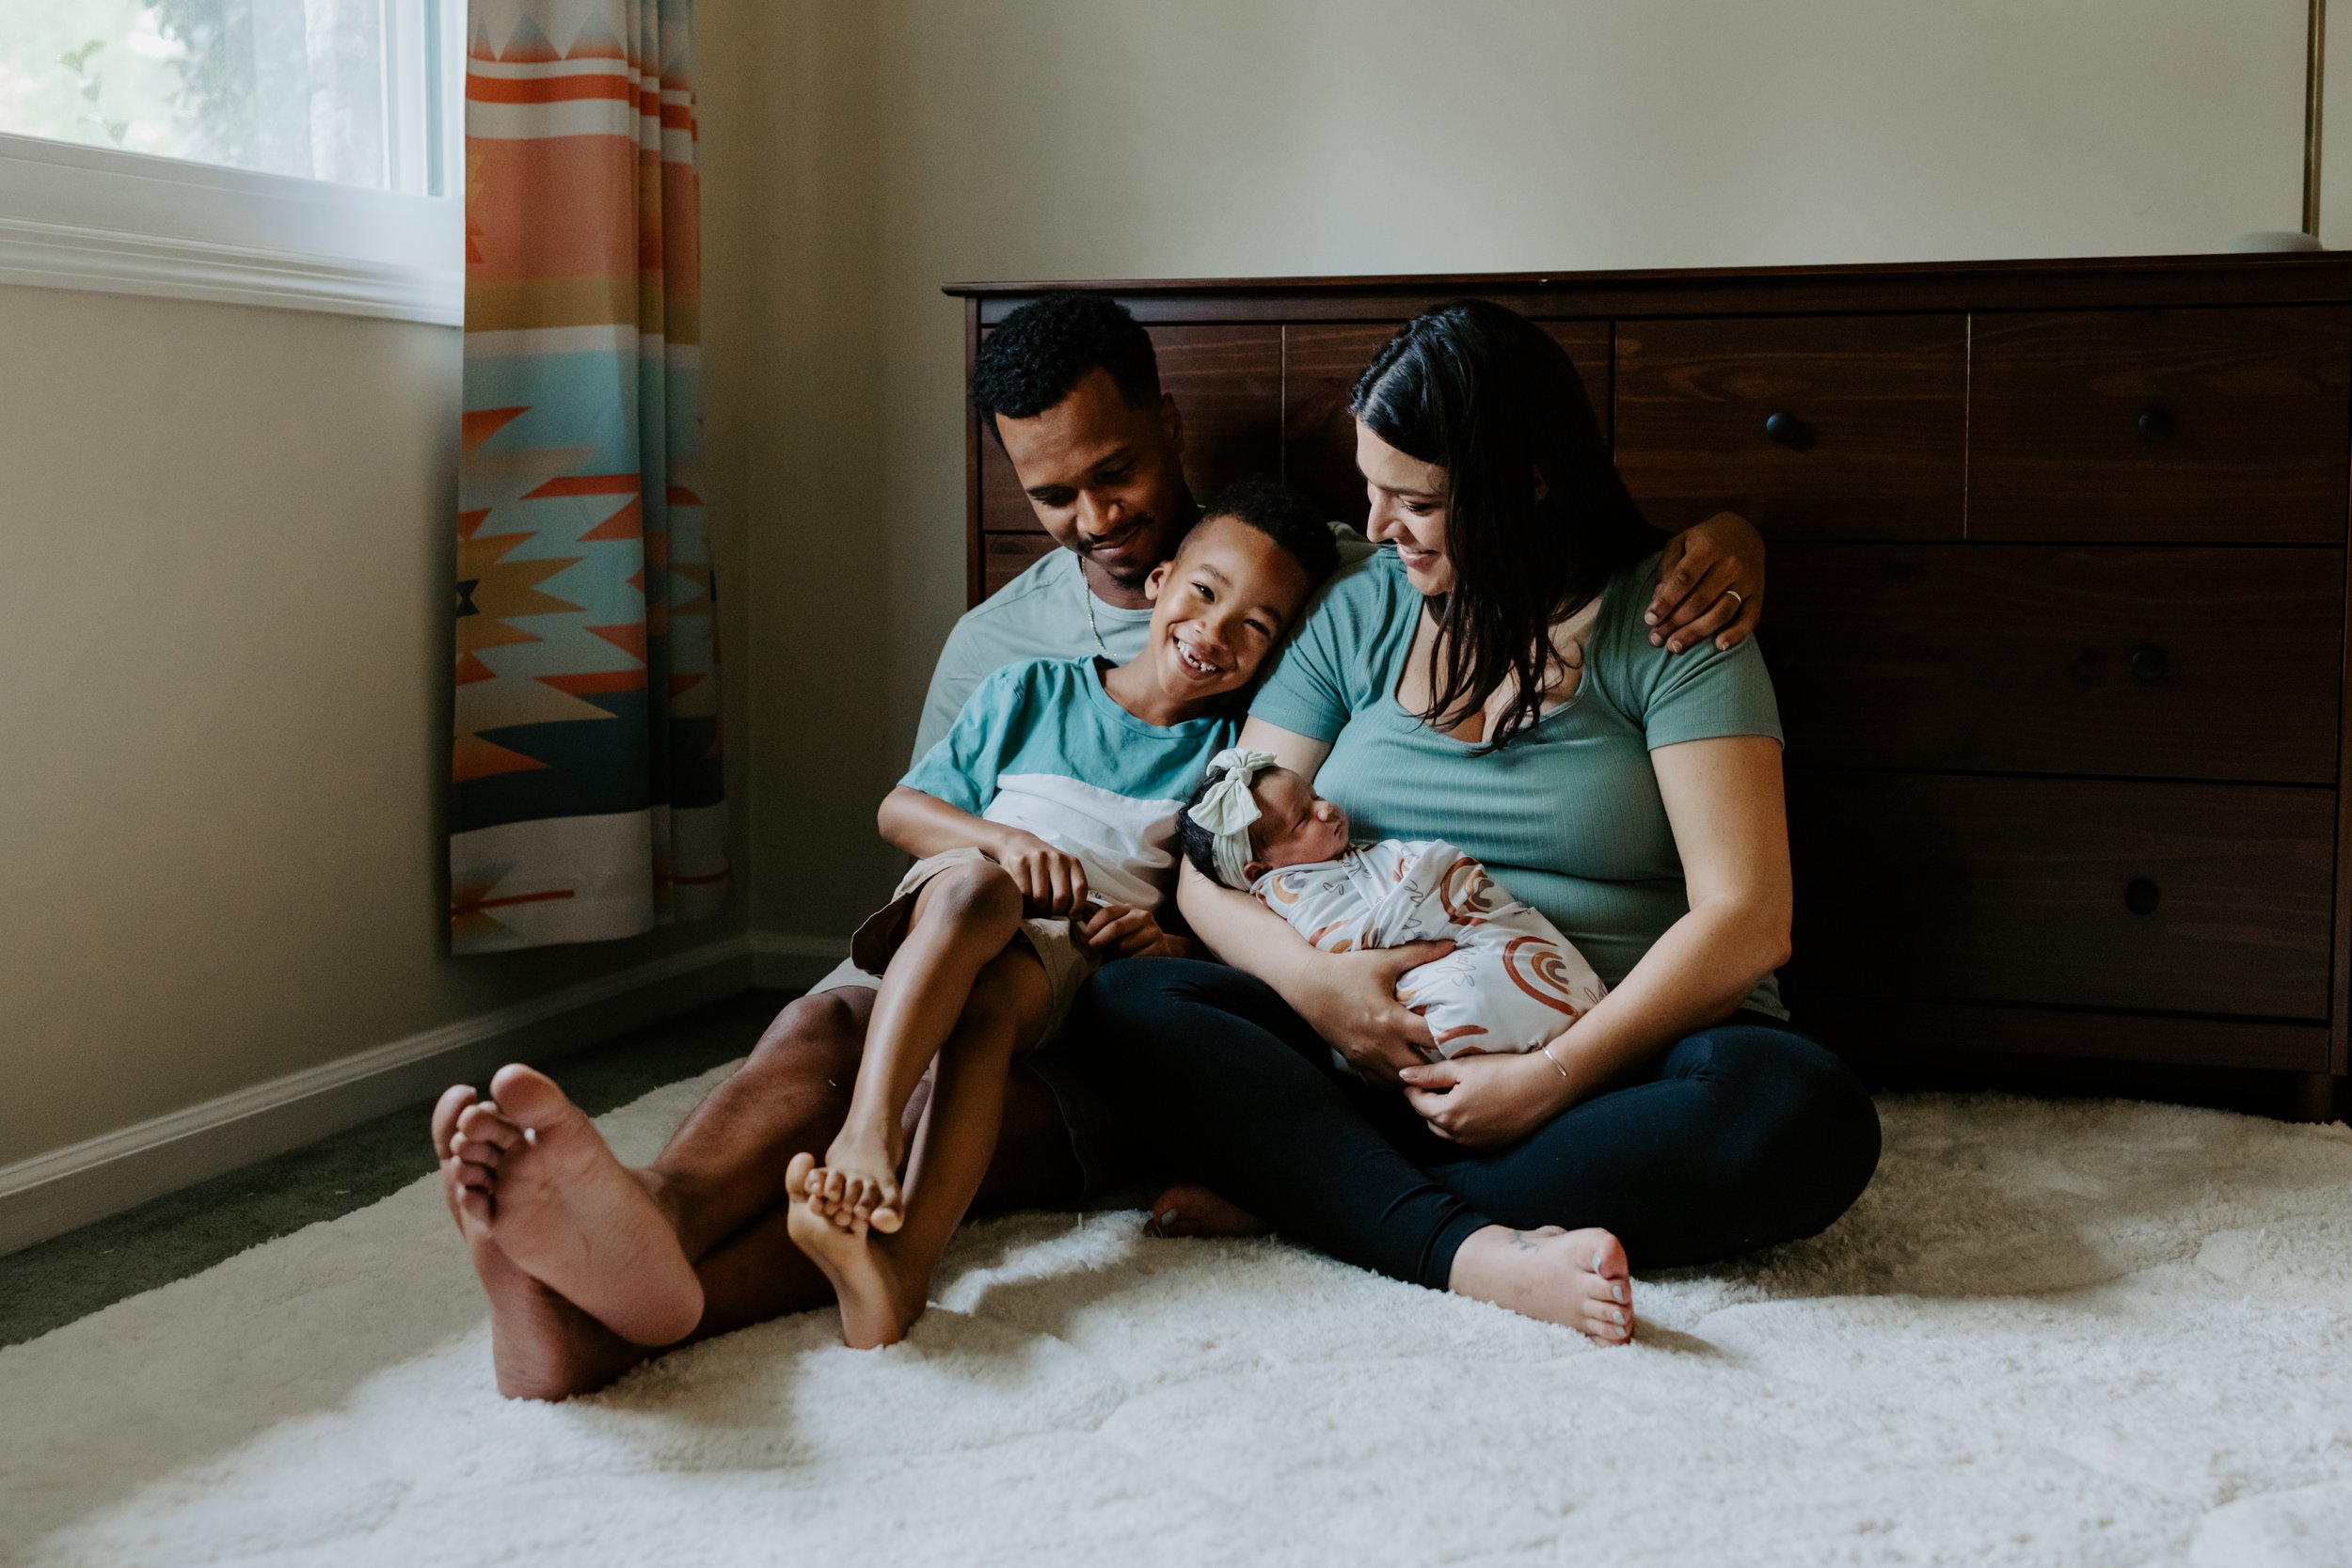 Baby Photoshoot Ideas at Home: An Ultimate Guide